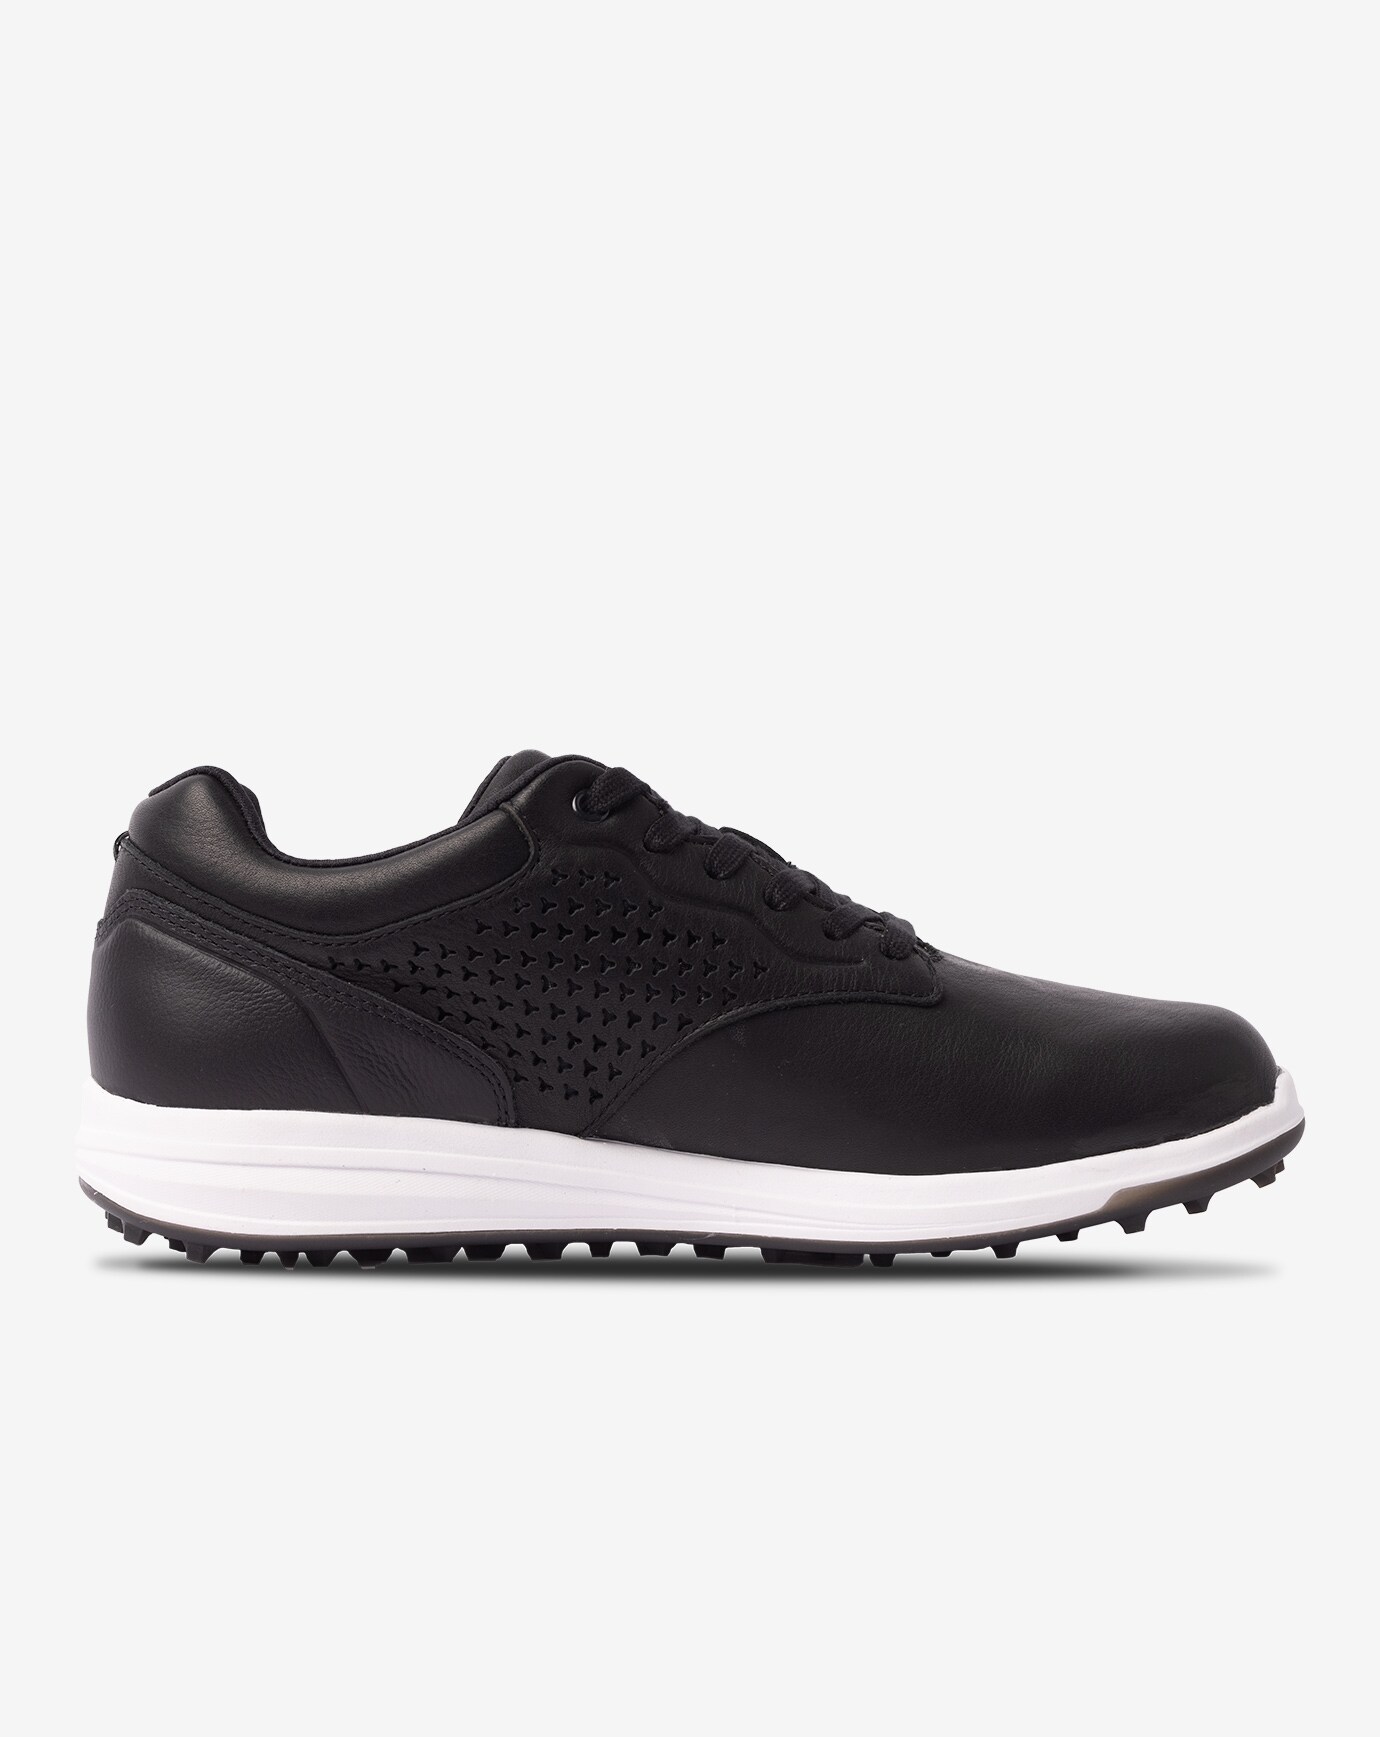 THE MONEYMAKER LUX SPIKELESS GOLF SHOE Image 3